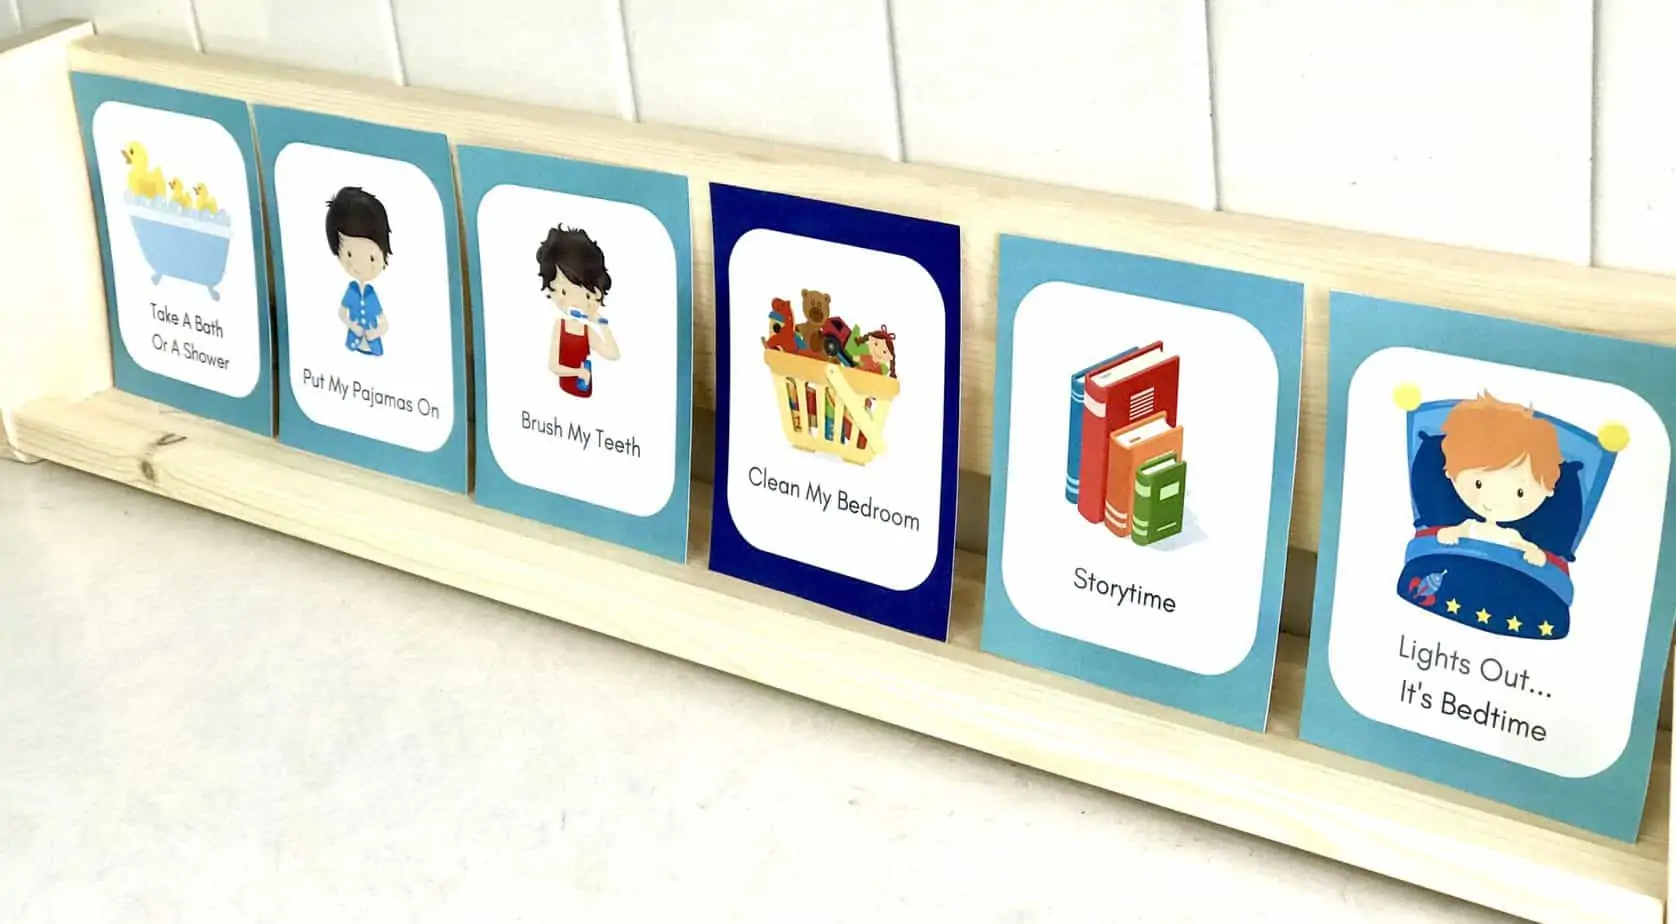 daily routine cards help kids keep a daily schedule and follow a predictable routine that makes them feel safe